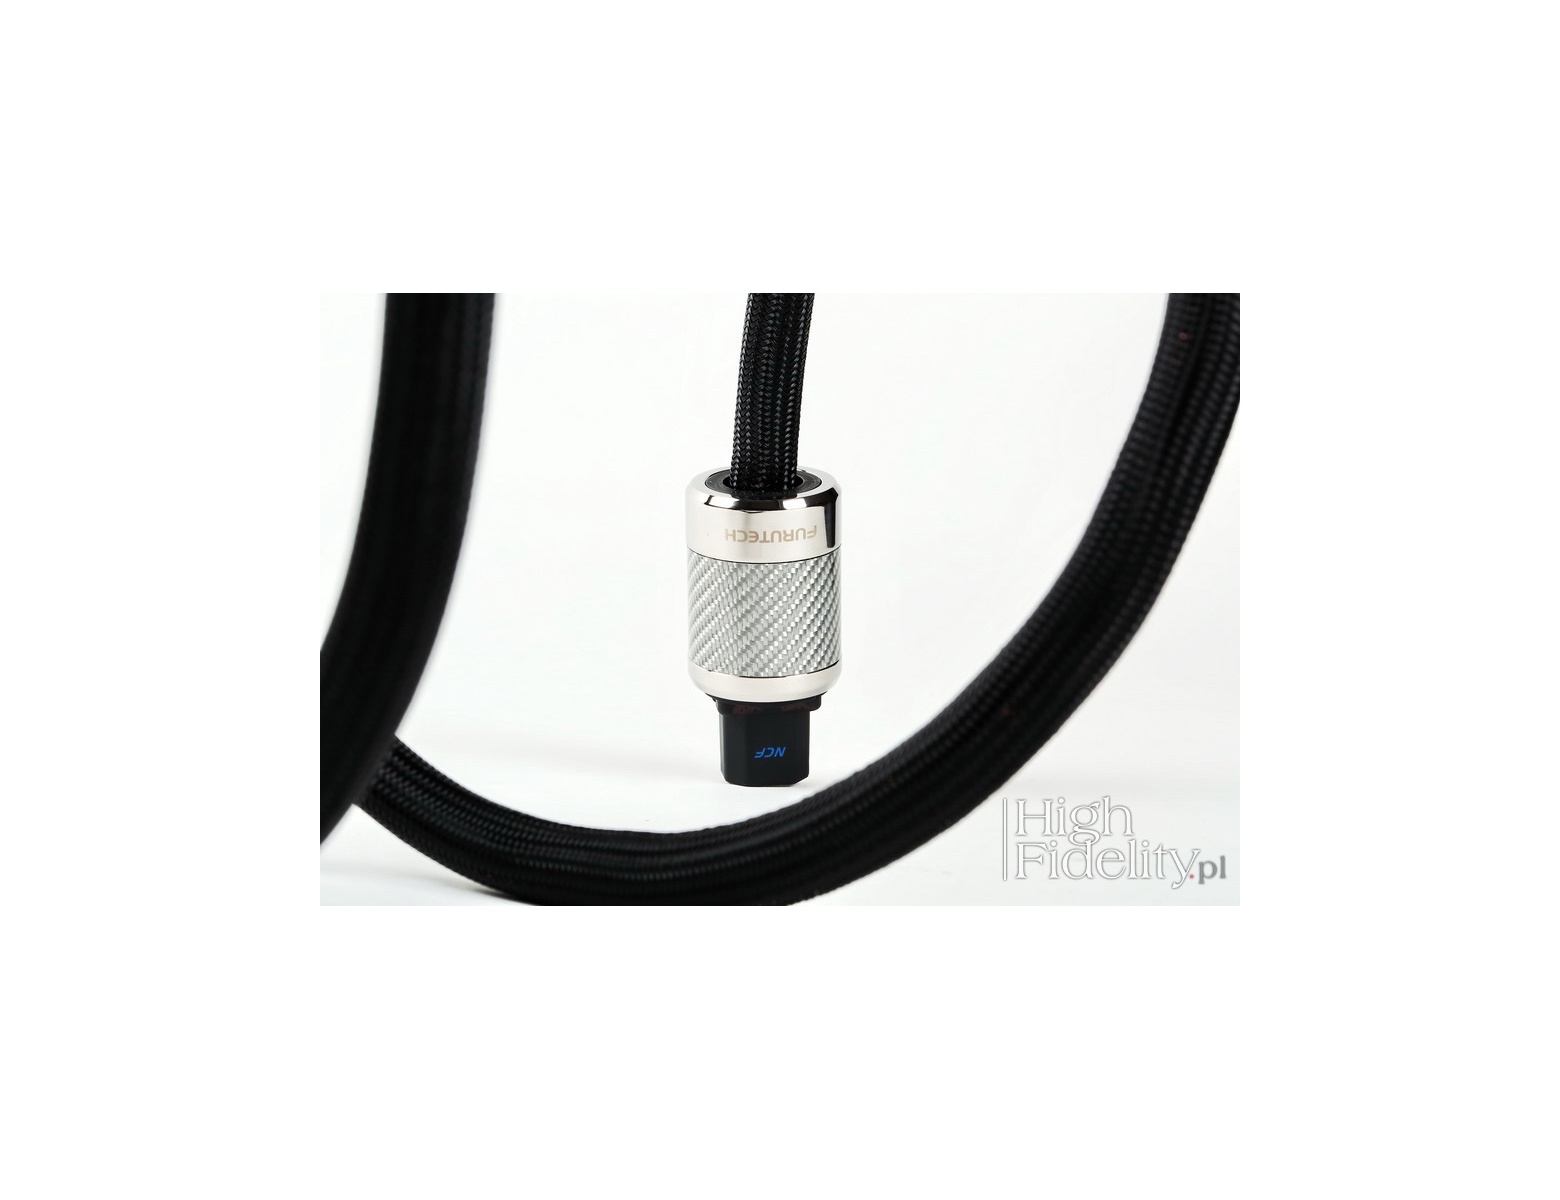 Acoustic Revive Power REFERENCE-triplec Power Cable 2m